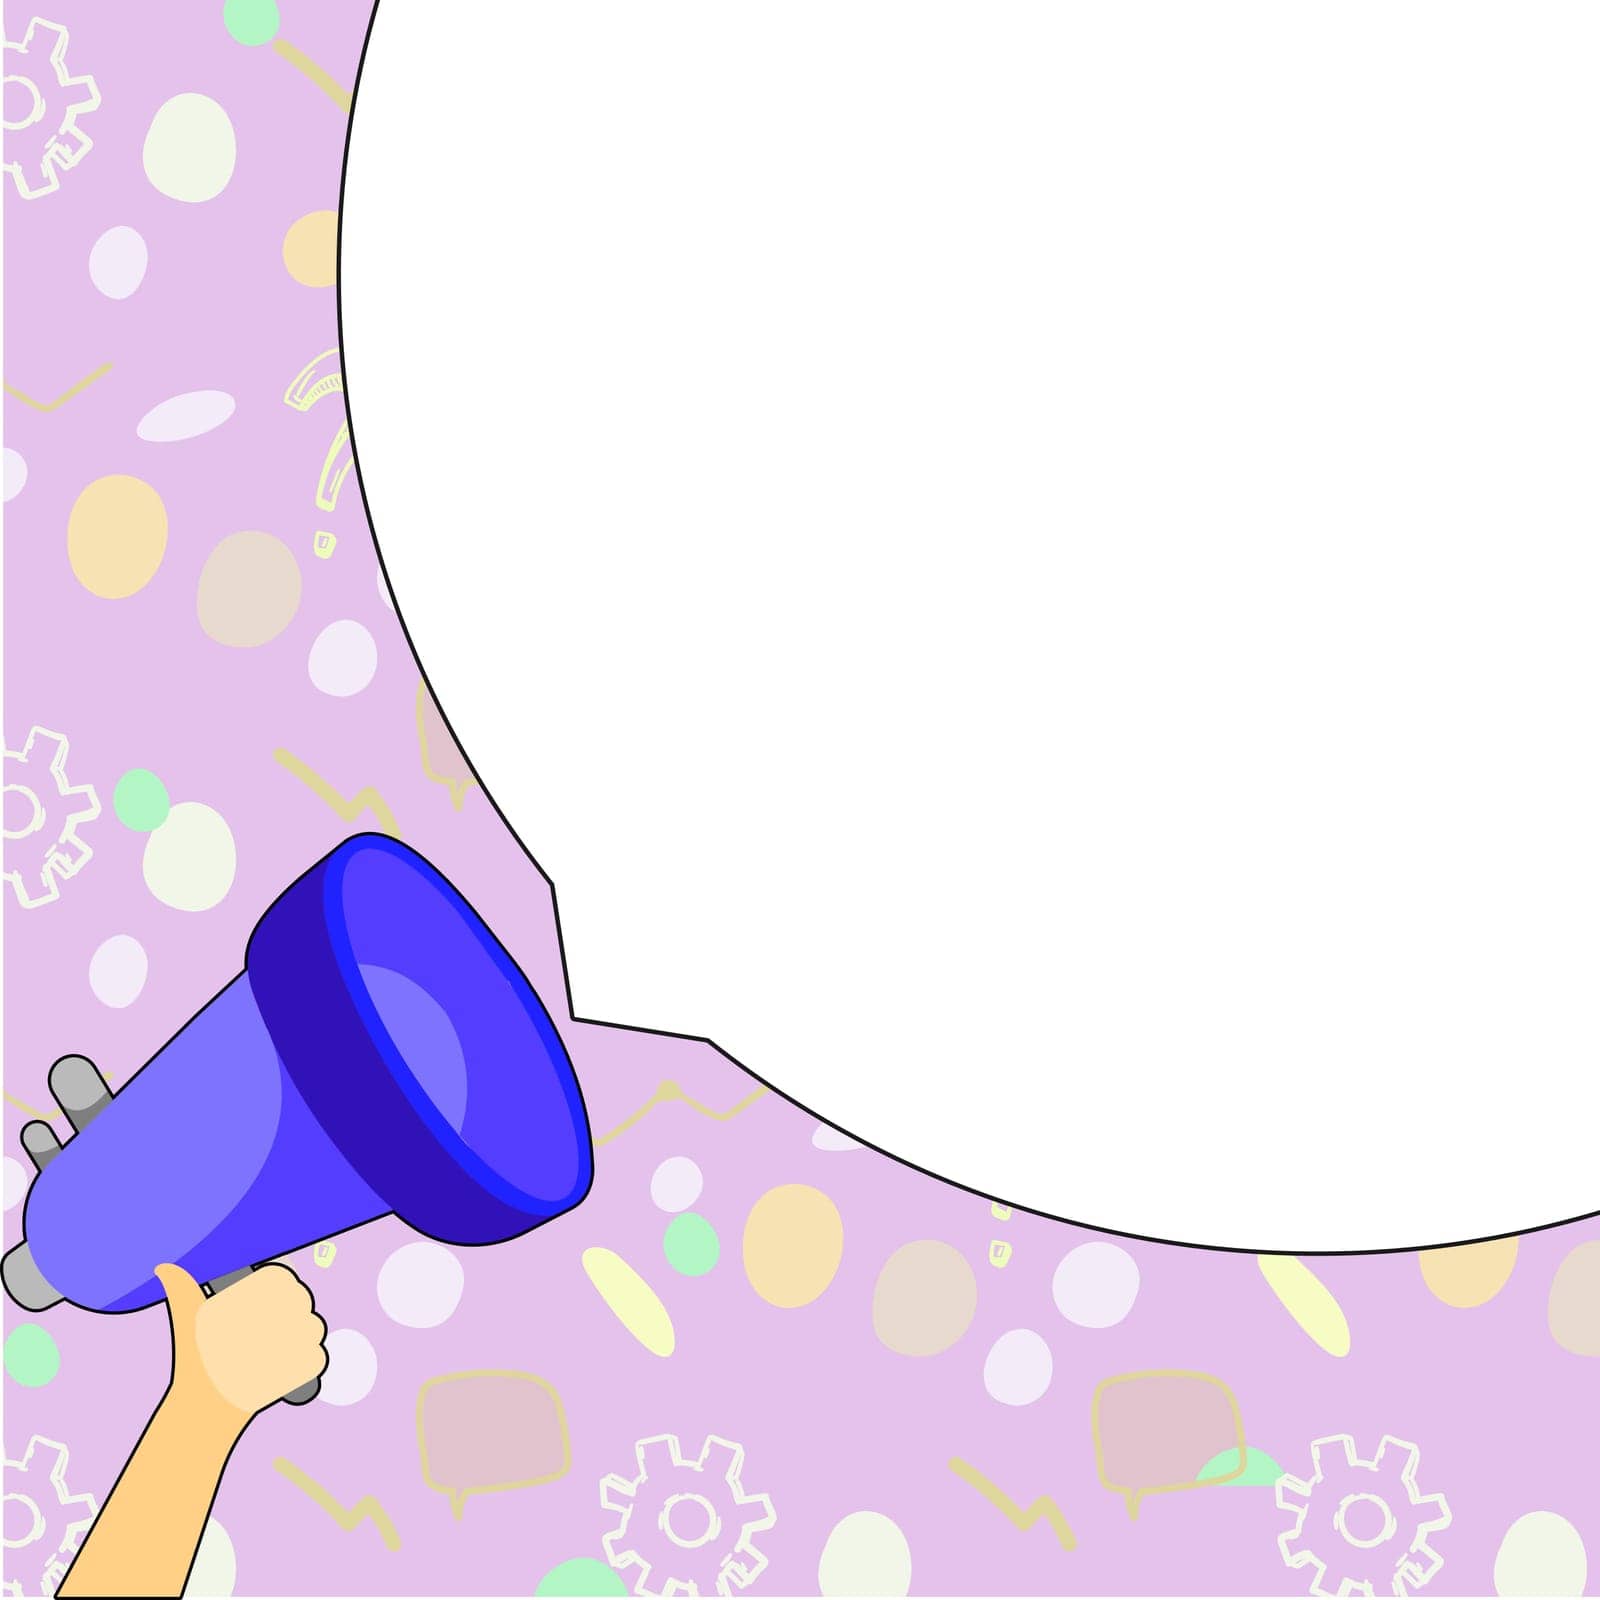 Bright Illustration Of Megaphone Making Loudly Brand New Infolmation. Using Bullhorn Giving Powerful Great News Advertisement With Speach Bubble. Big Empty Dialog Box by nialowwa